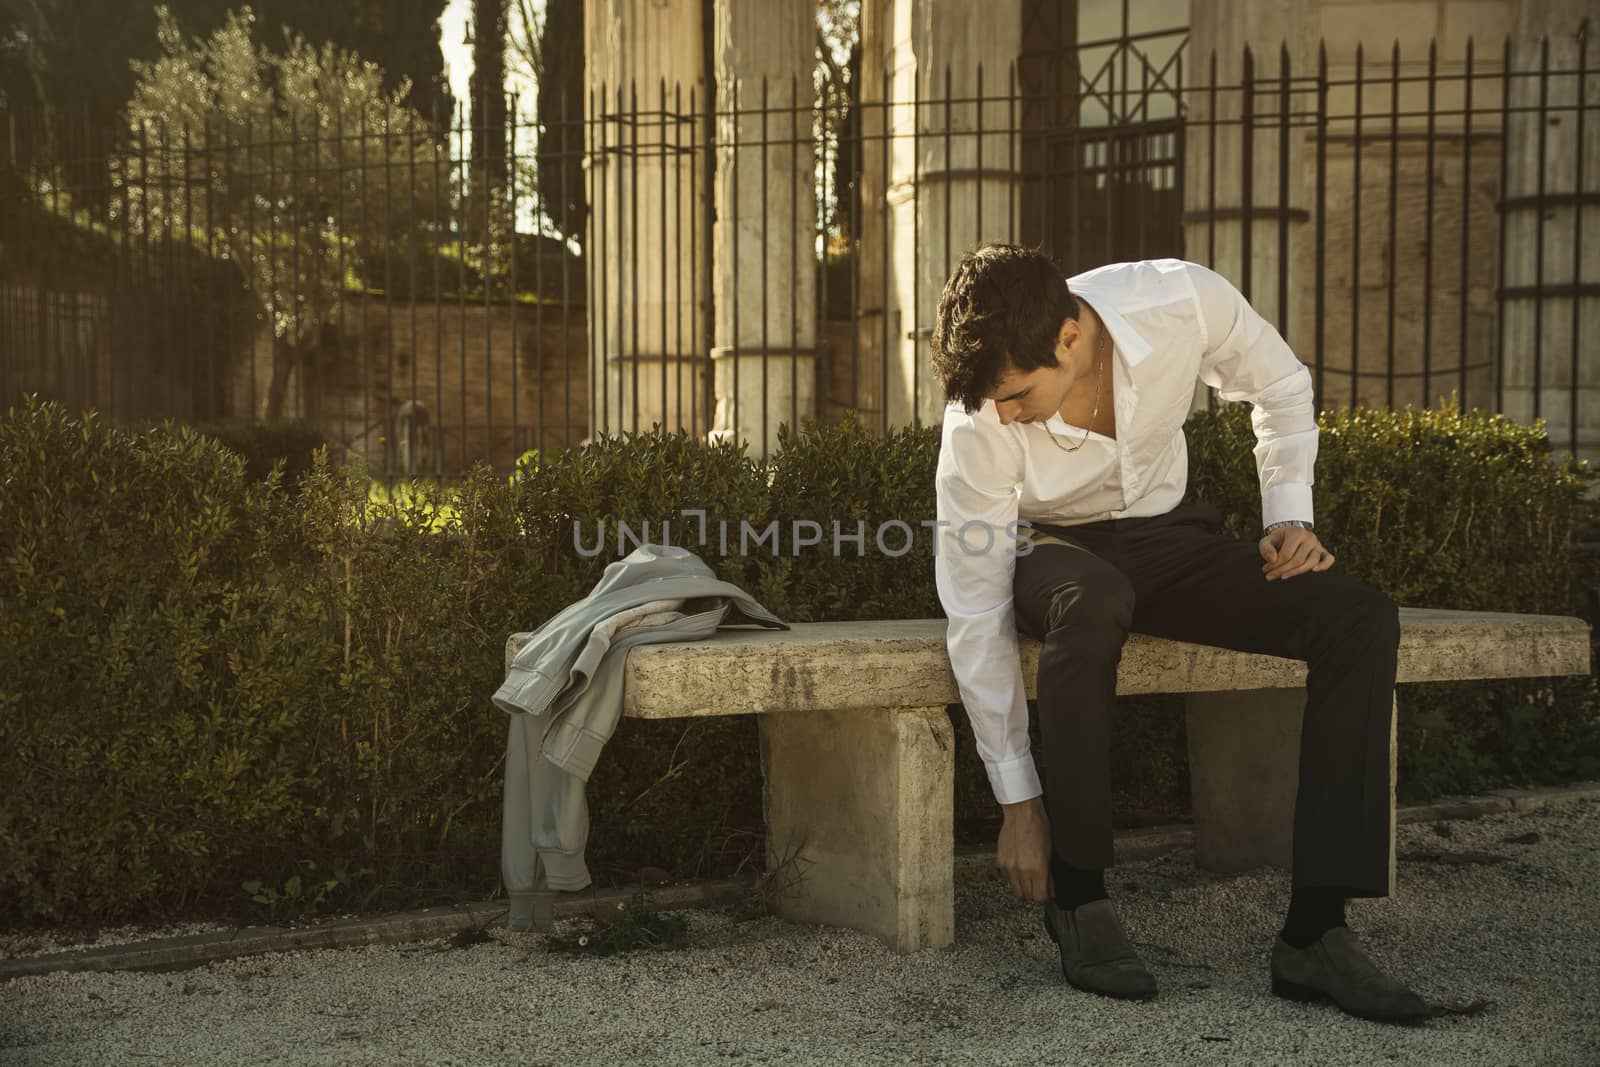 Handsome young man in European city, sitting on stone bench by artofphoto